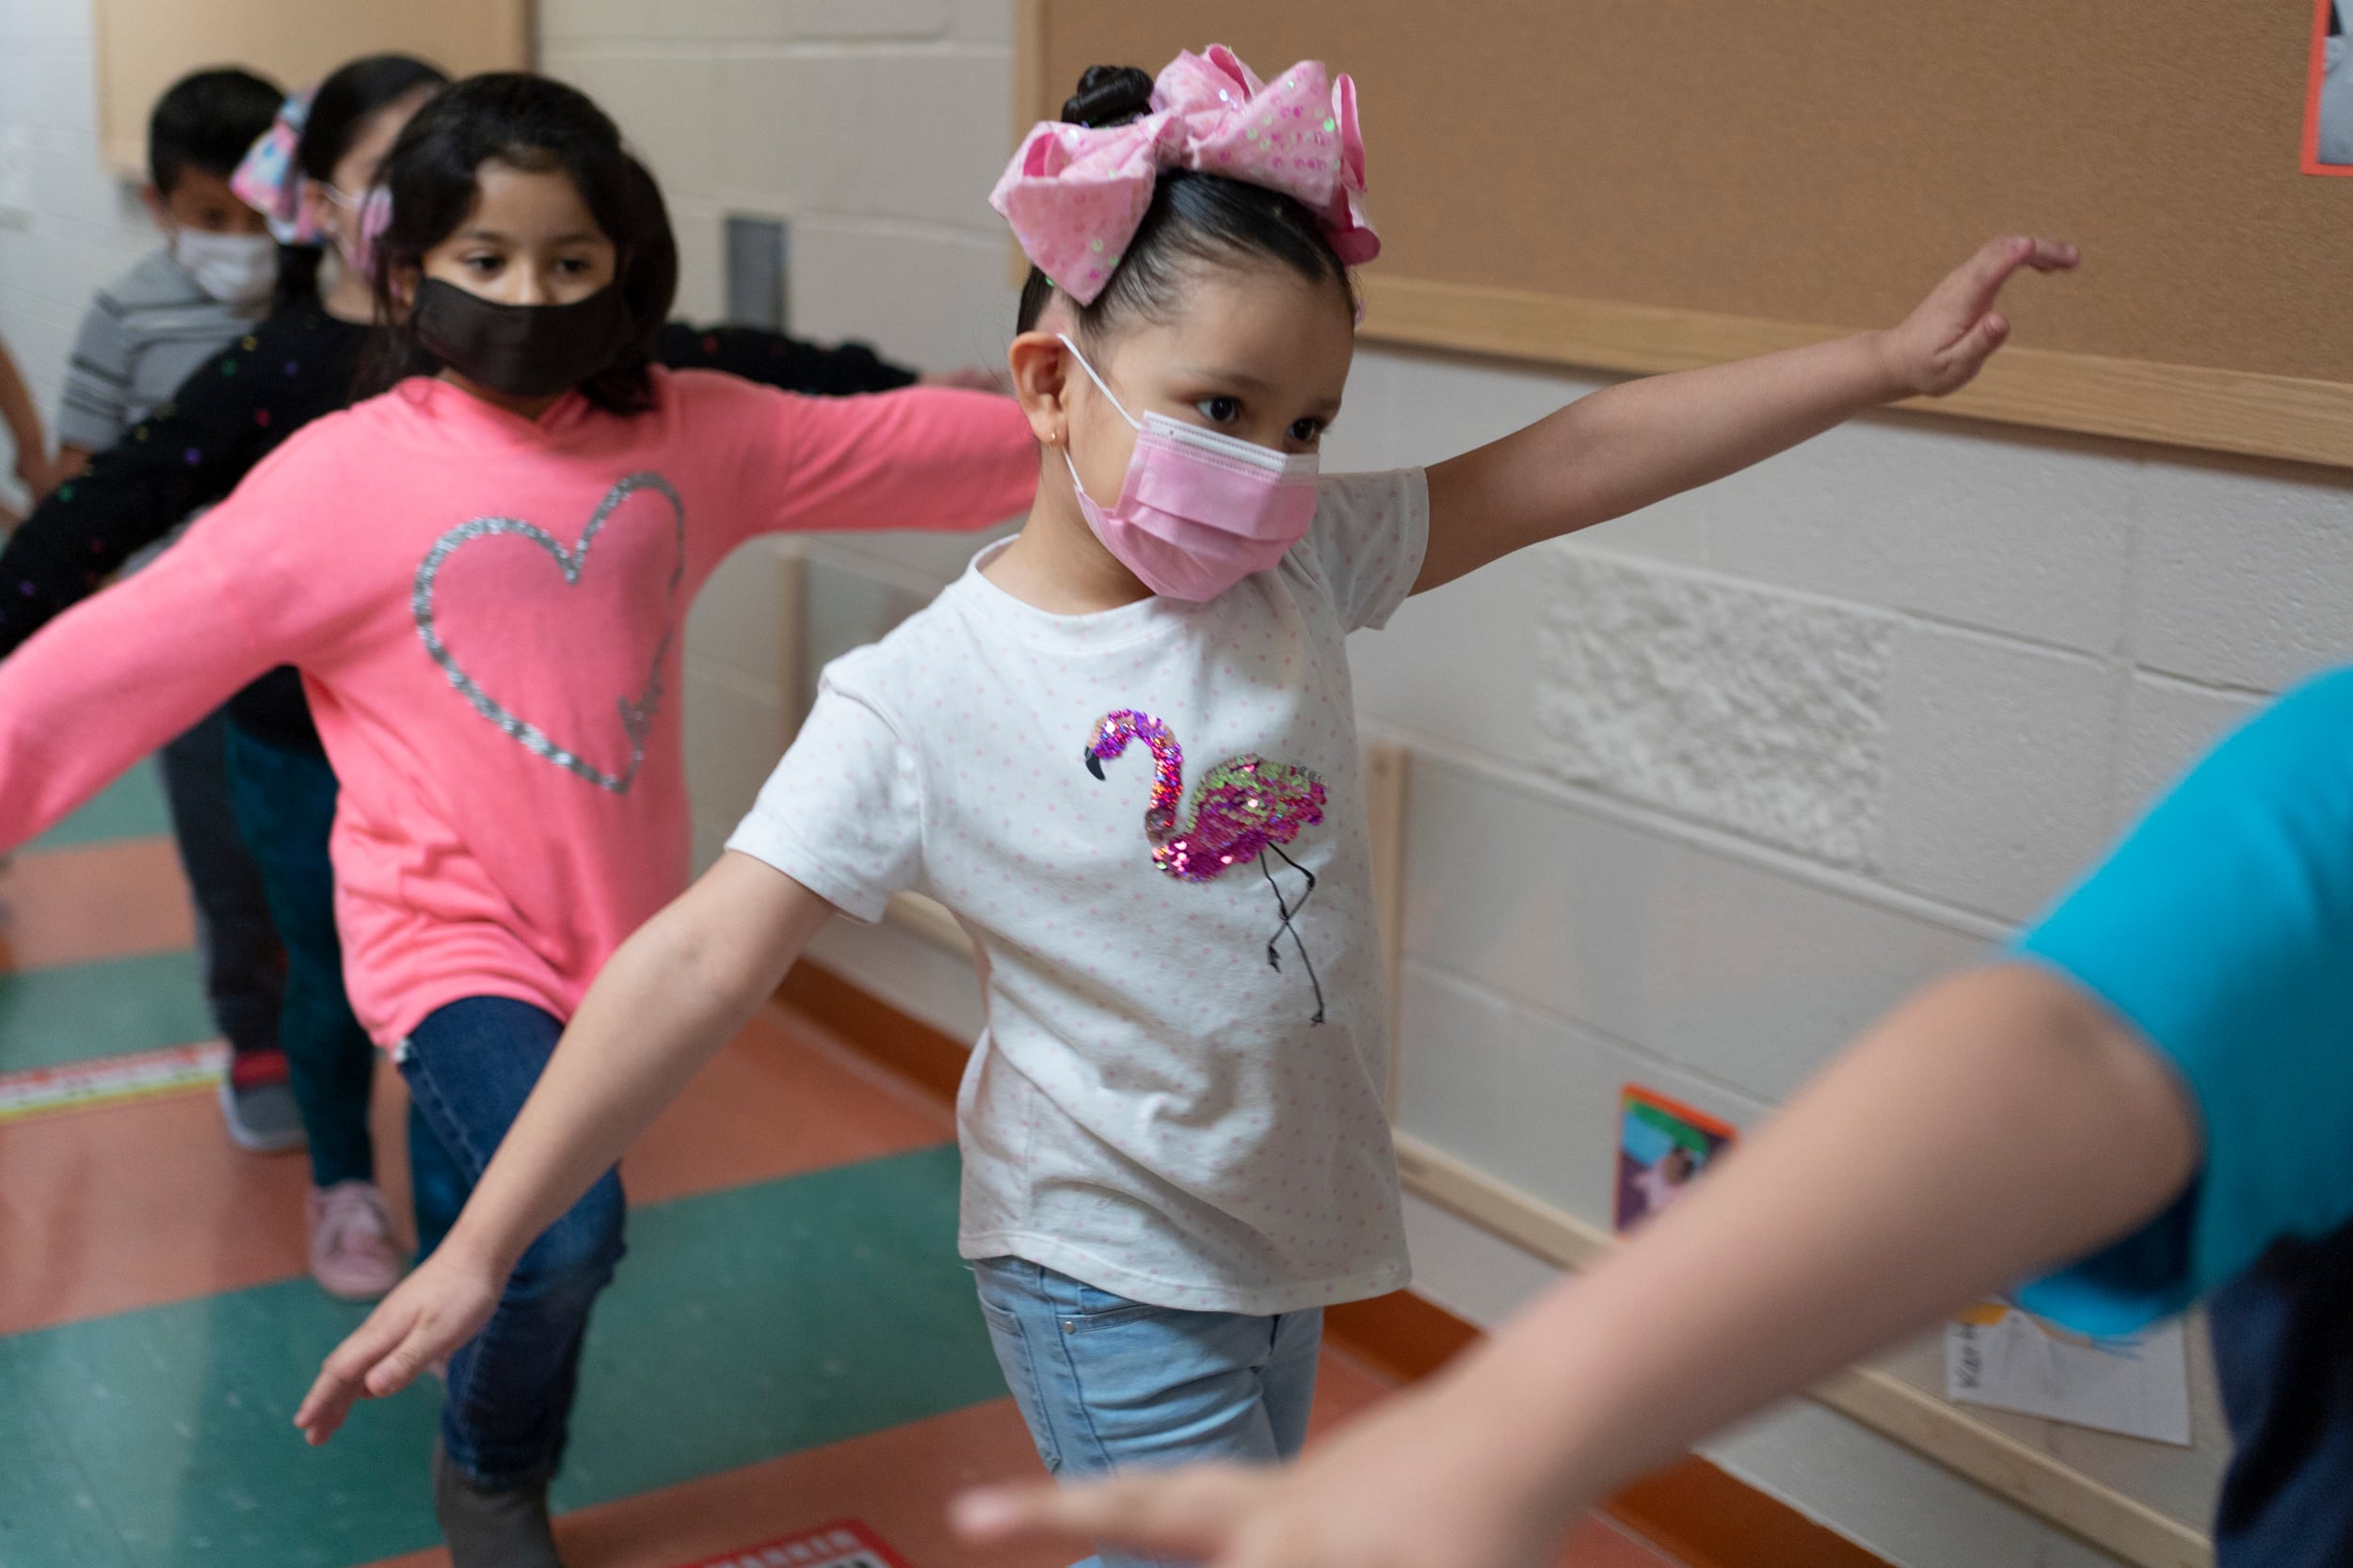 A child wearing a blue shirt is in front of a girl wearing a white flamingo shirt, a pink bow, and a pink surgical mask, arms outstretched in a class hallway. The girl behind her is wearing a pink sweater with a silver heart on it.